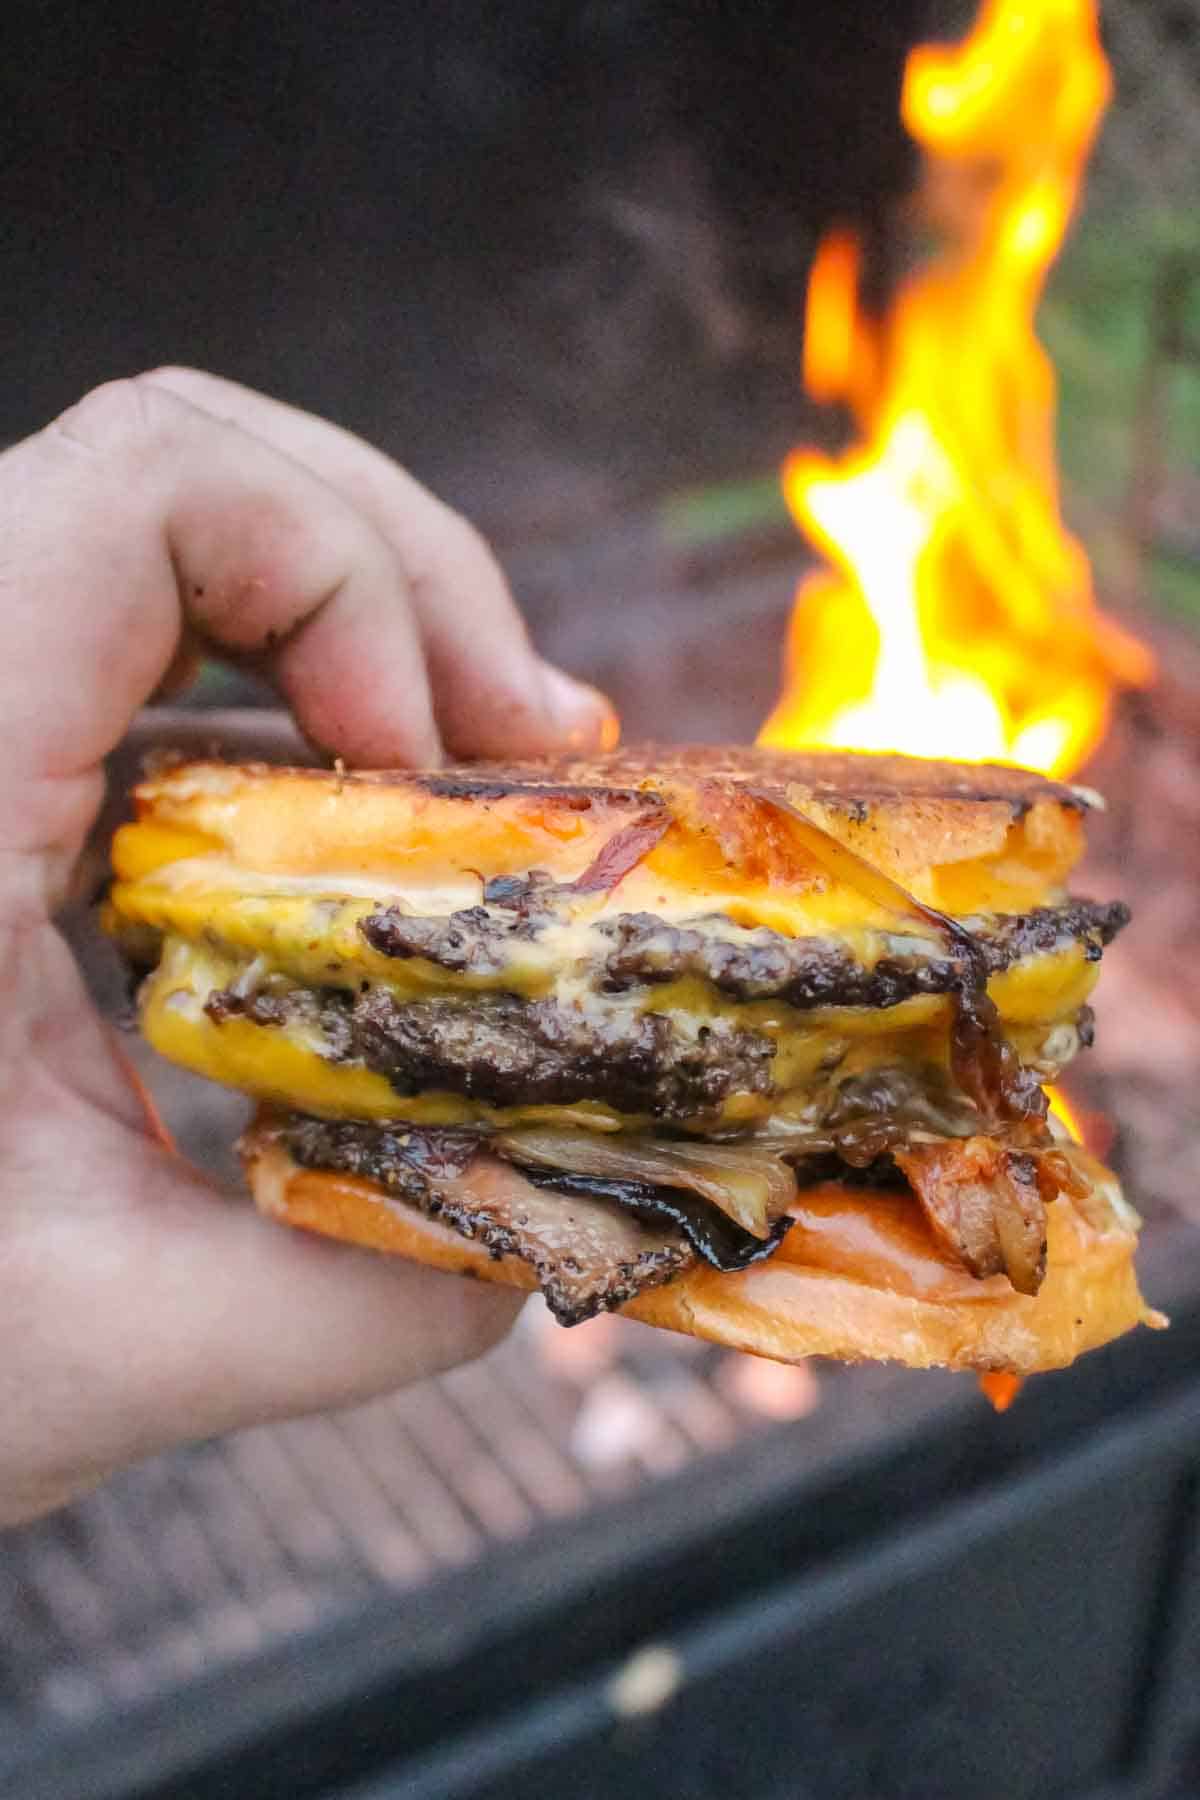 A close up shot of an animal style patty melt held next to the fire.